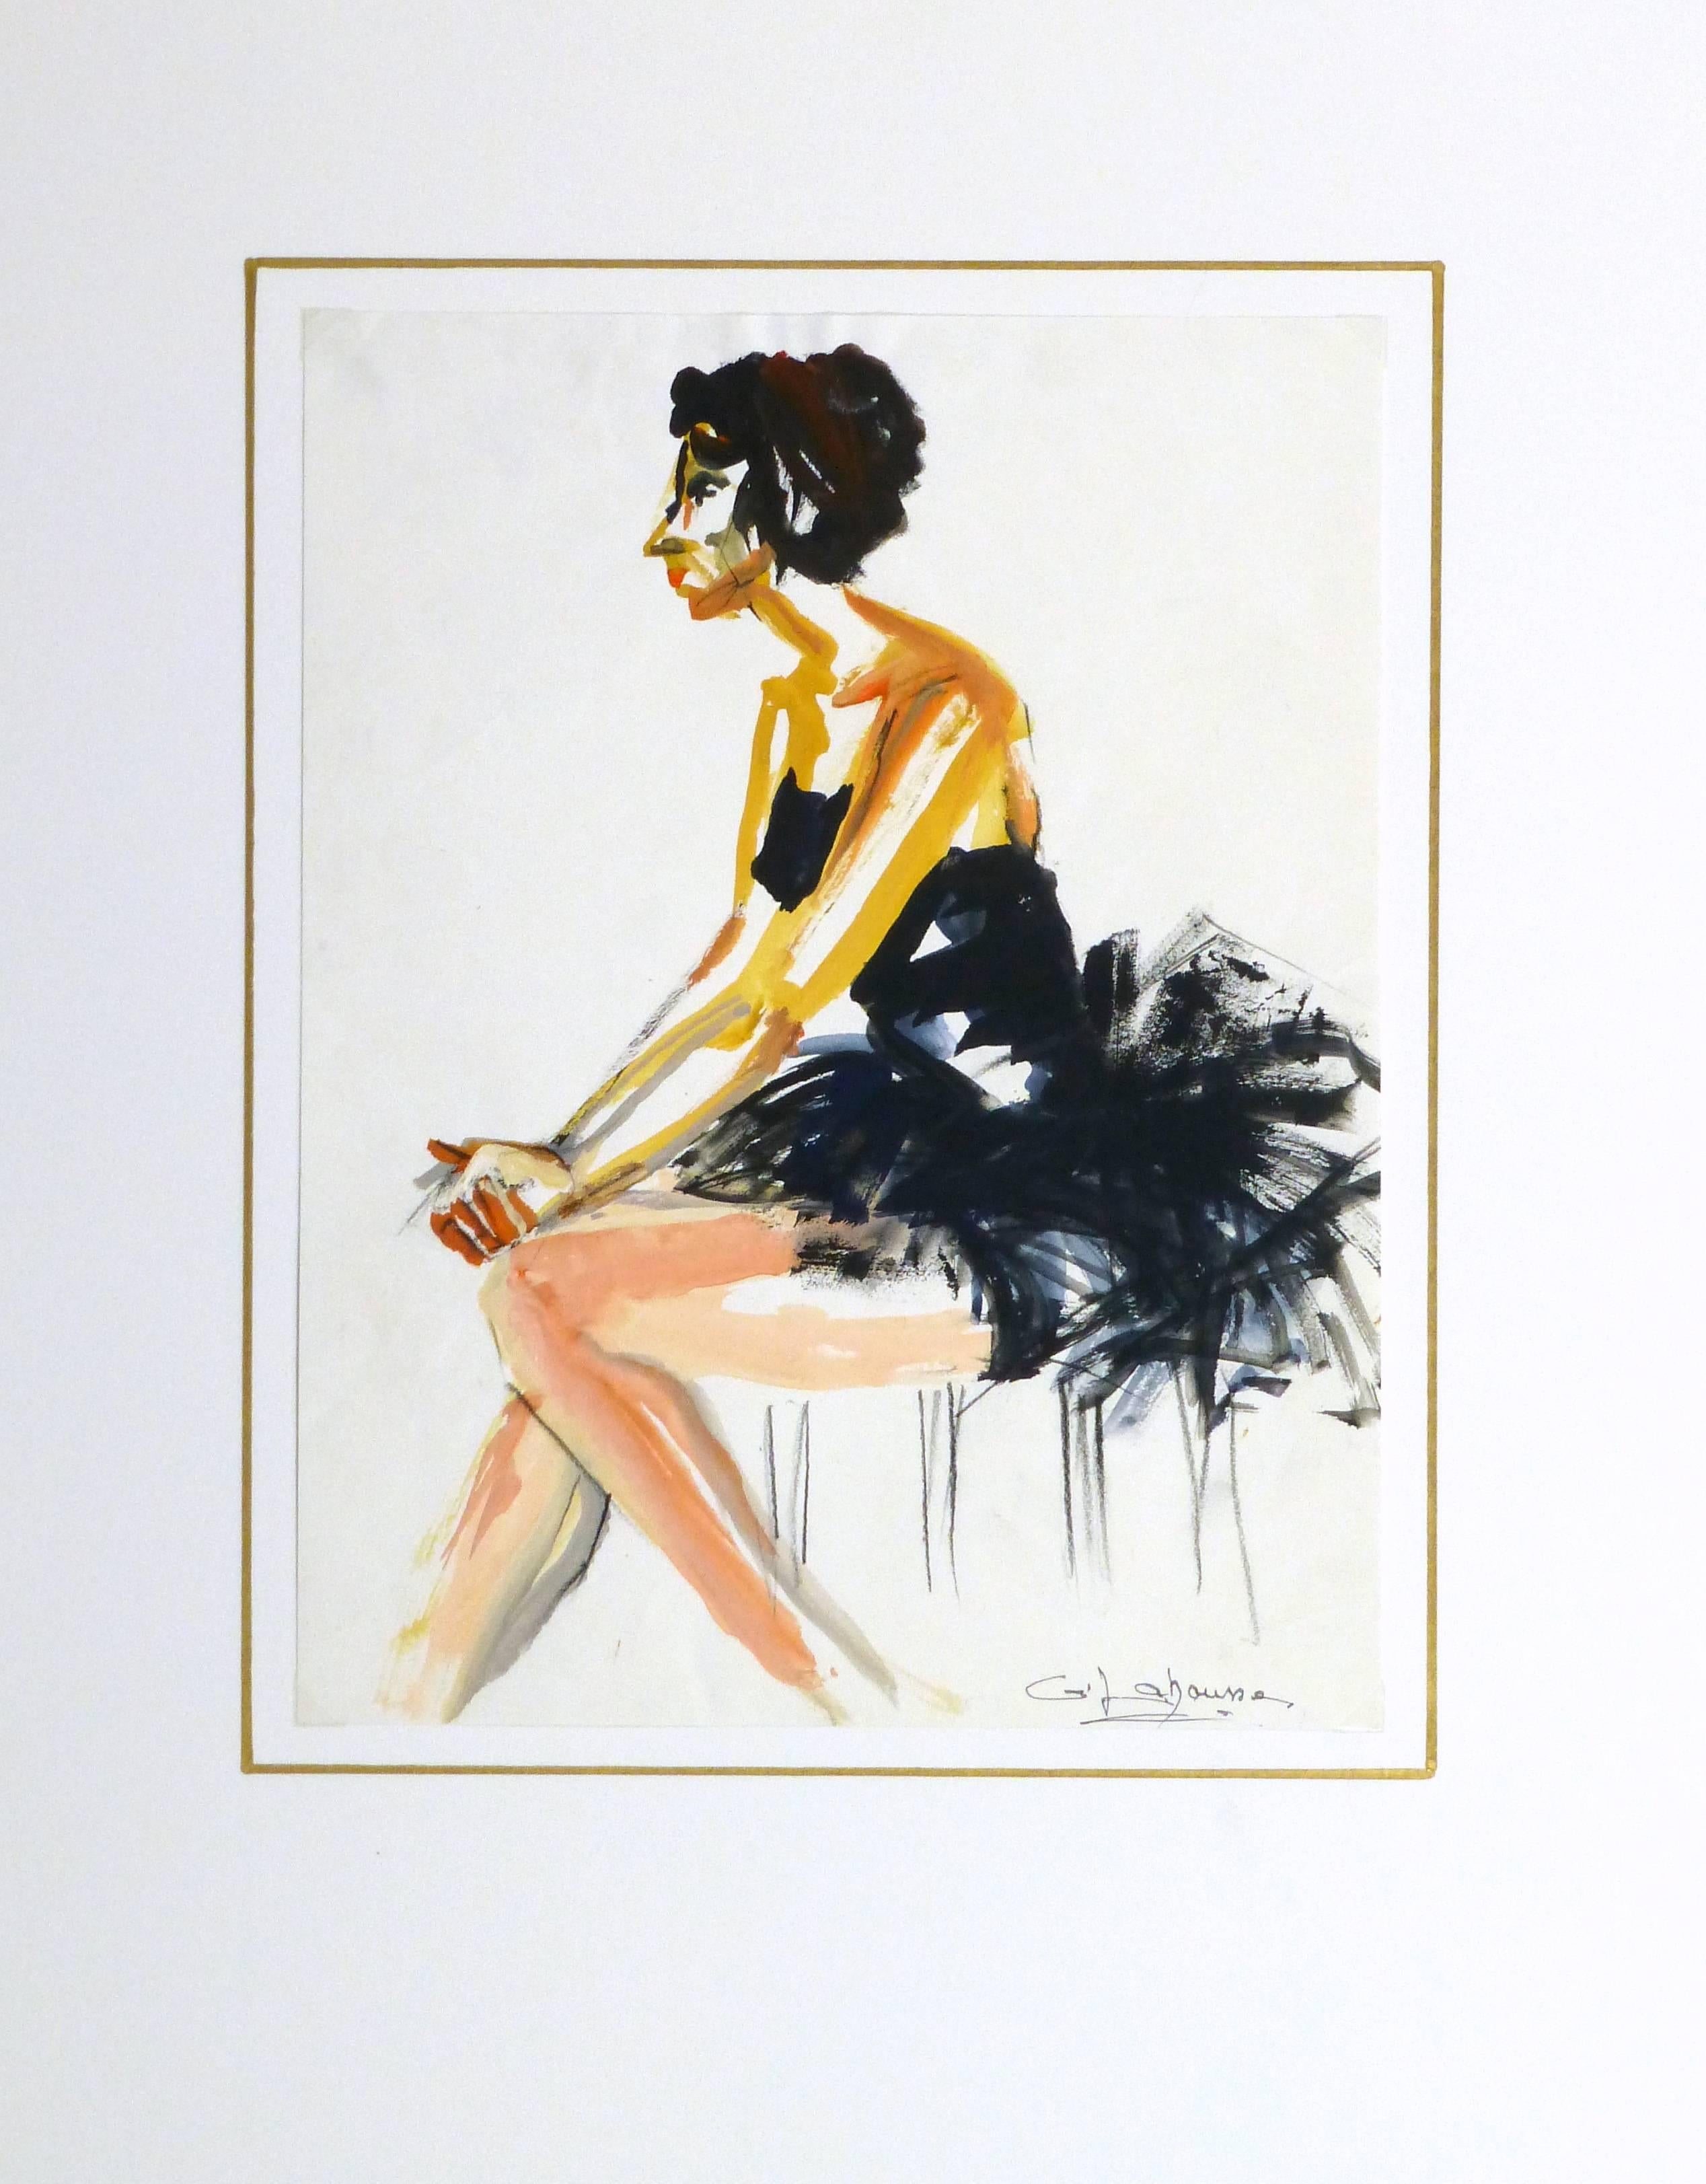 Vintage gouache painting of a dark haired ballerina seated in a black costume by French artist G. Lahousse, circa 1960. Signed lower right.

Original artwork on paper displayed on a white mat with a gold border. Mat fits a standard-size frame.